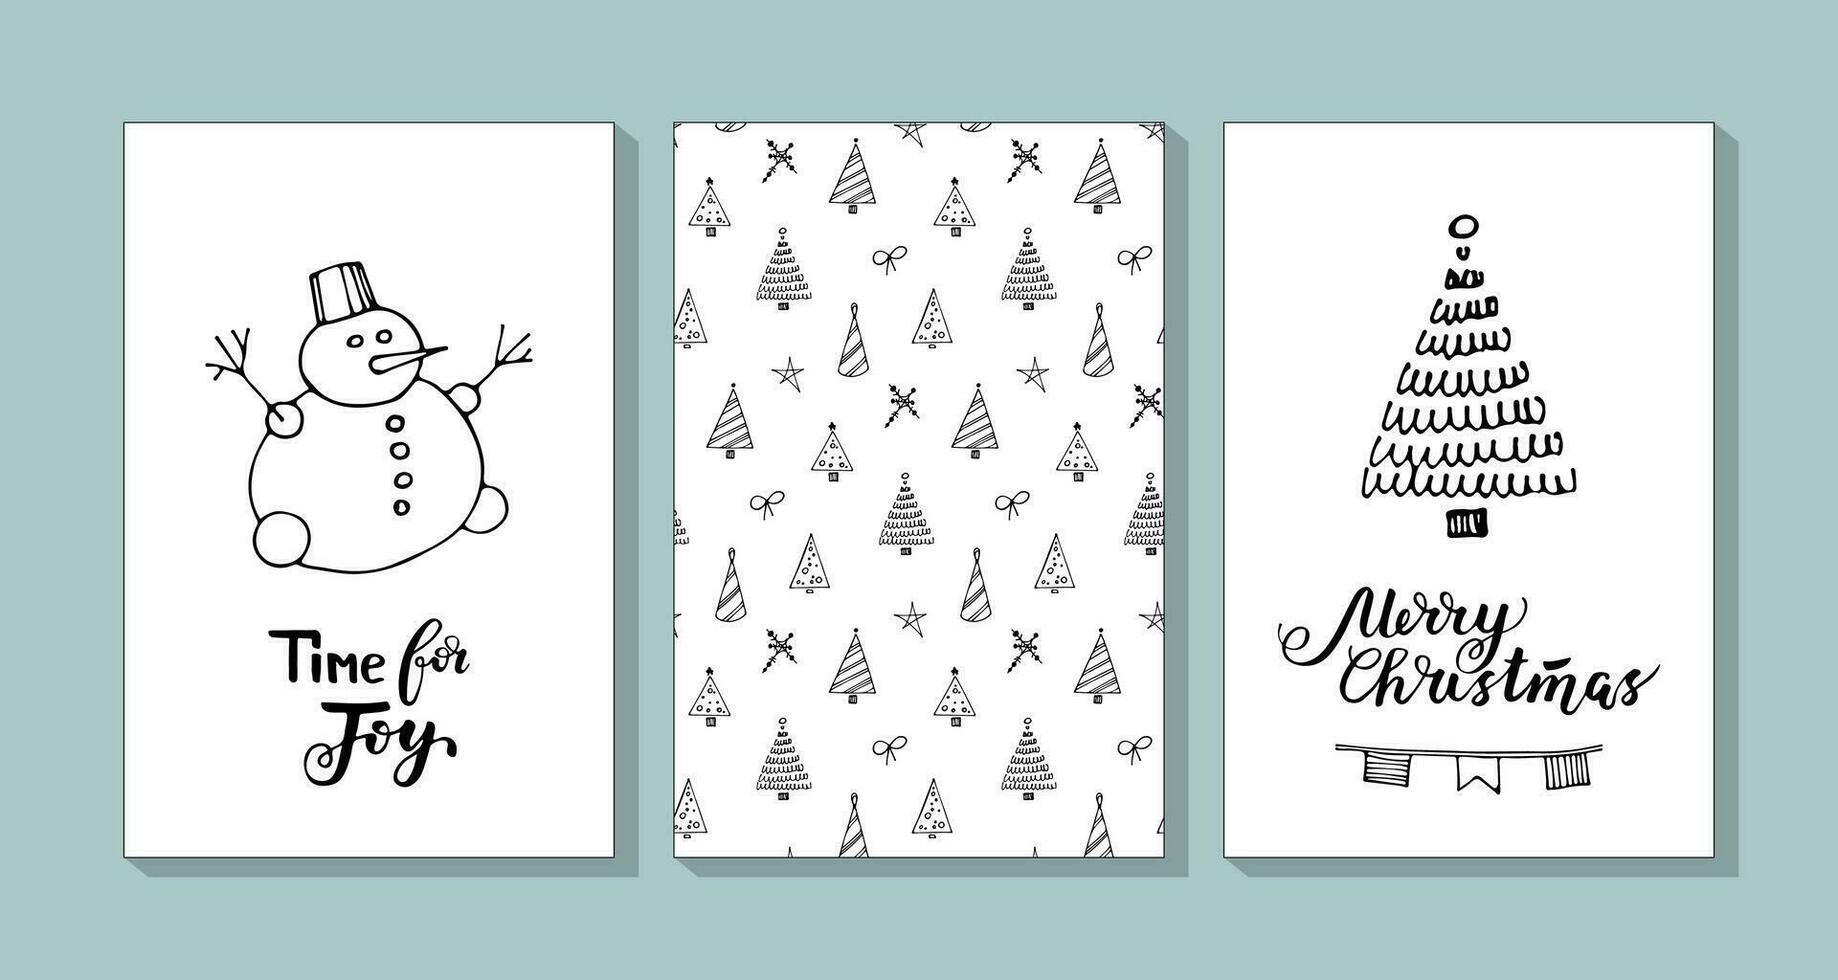 Collection of vector Christmas cards. Greeting board with hand drawn Christmas symbol and pattern. Includes holiday doodle lettering.